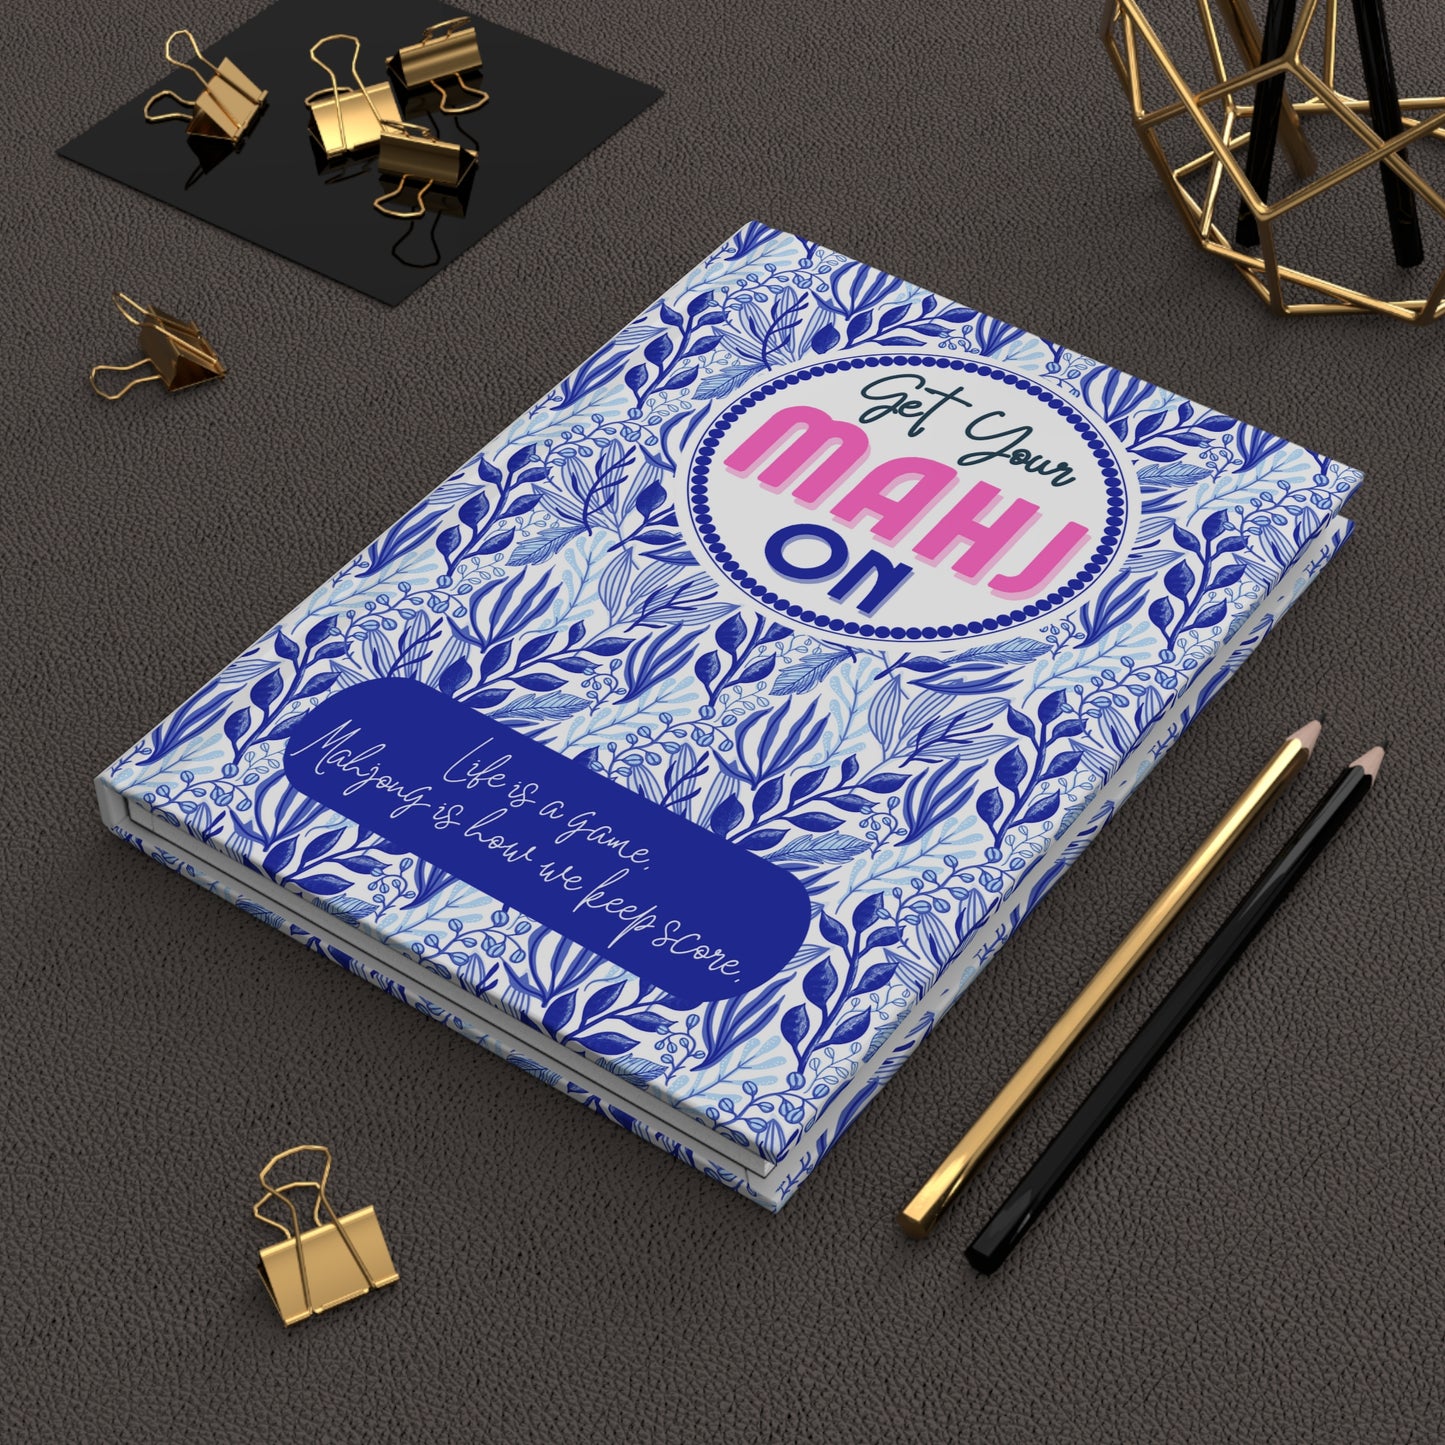 Mahjong Score Notebook, Blue- Mah-jongg journal to note memories and scores through time. Great gift!